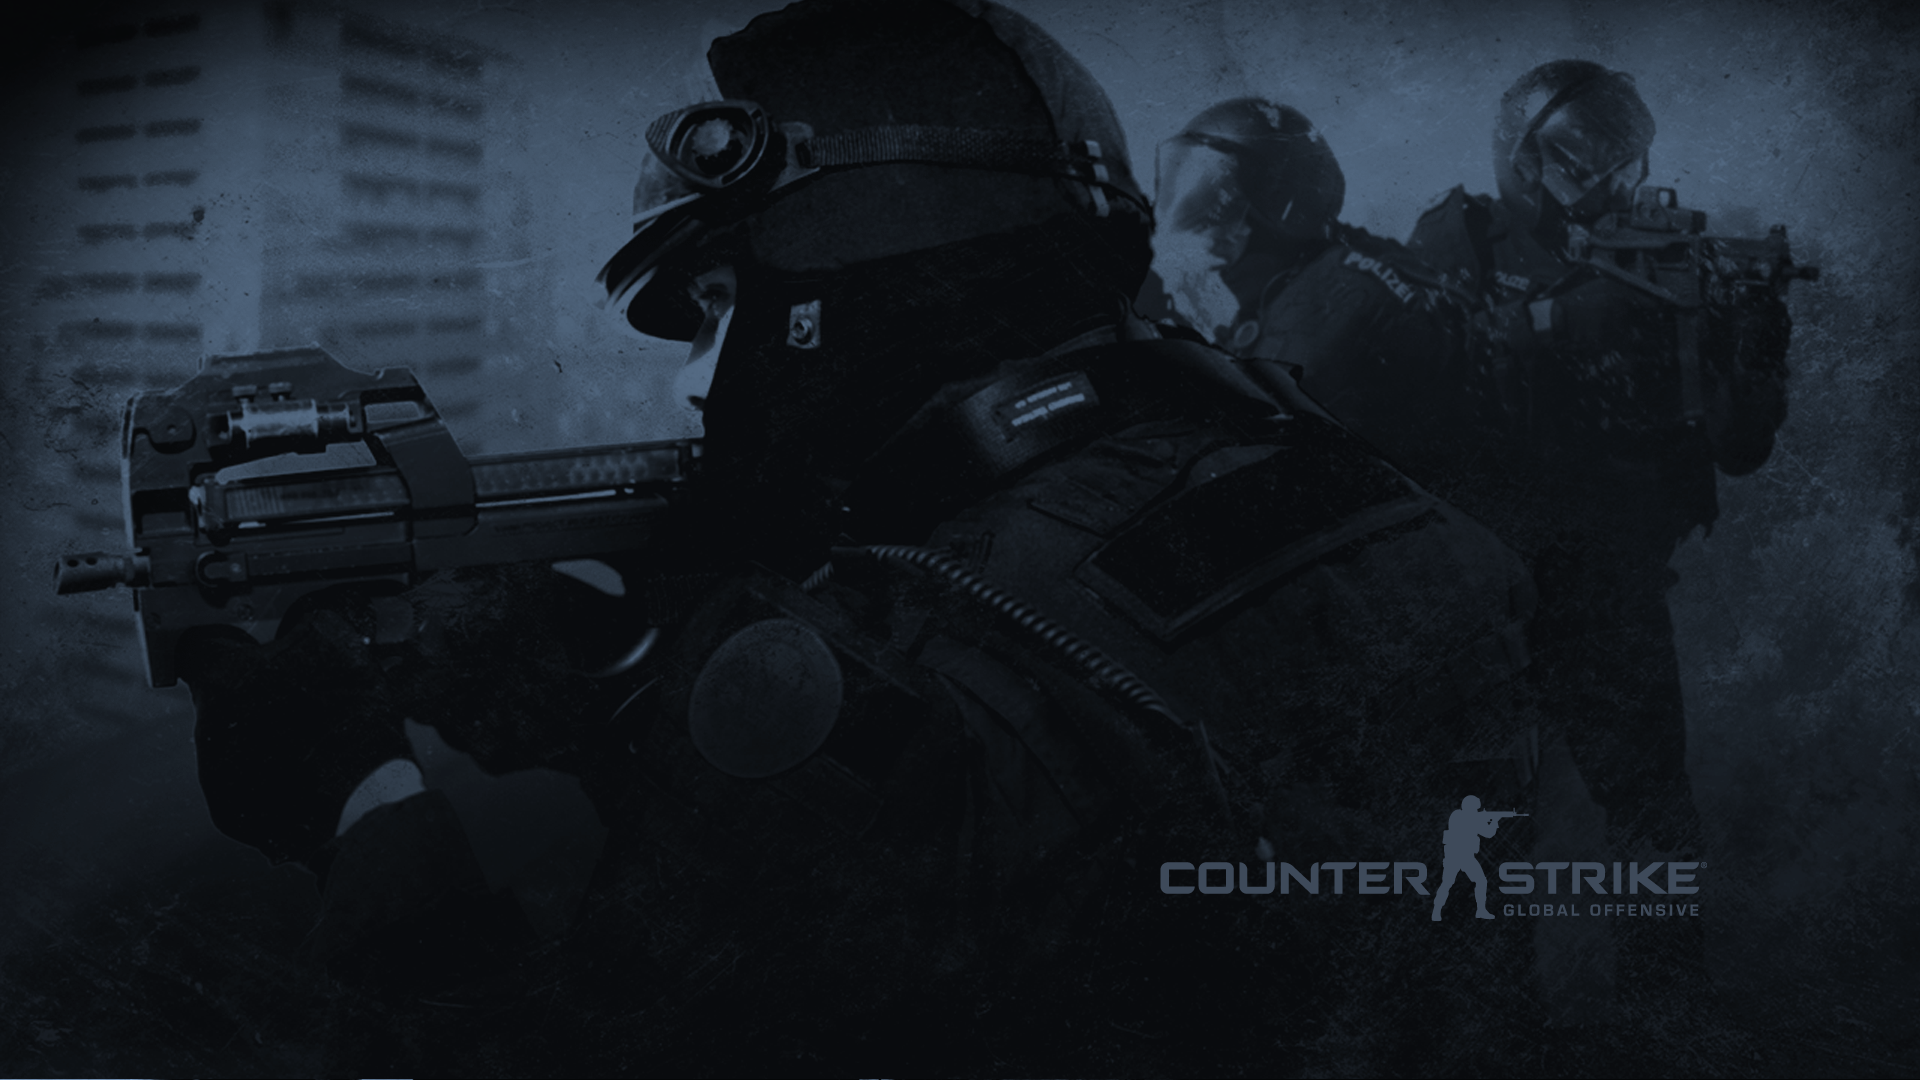 Gallery for - counter strike wallpaper hd download